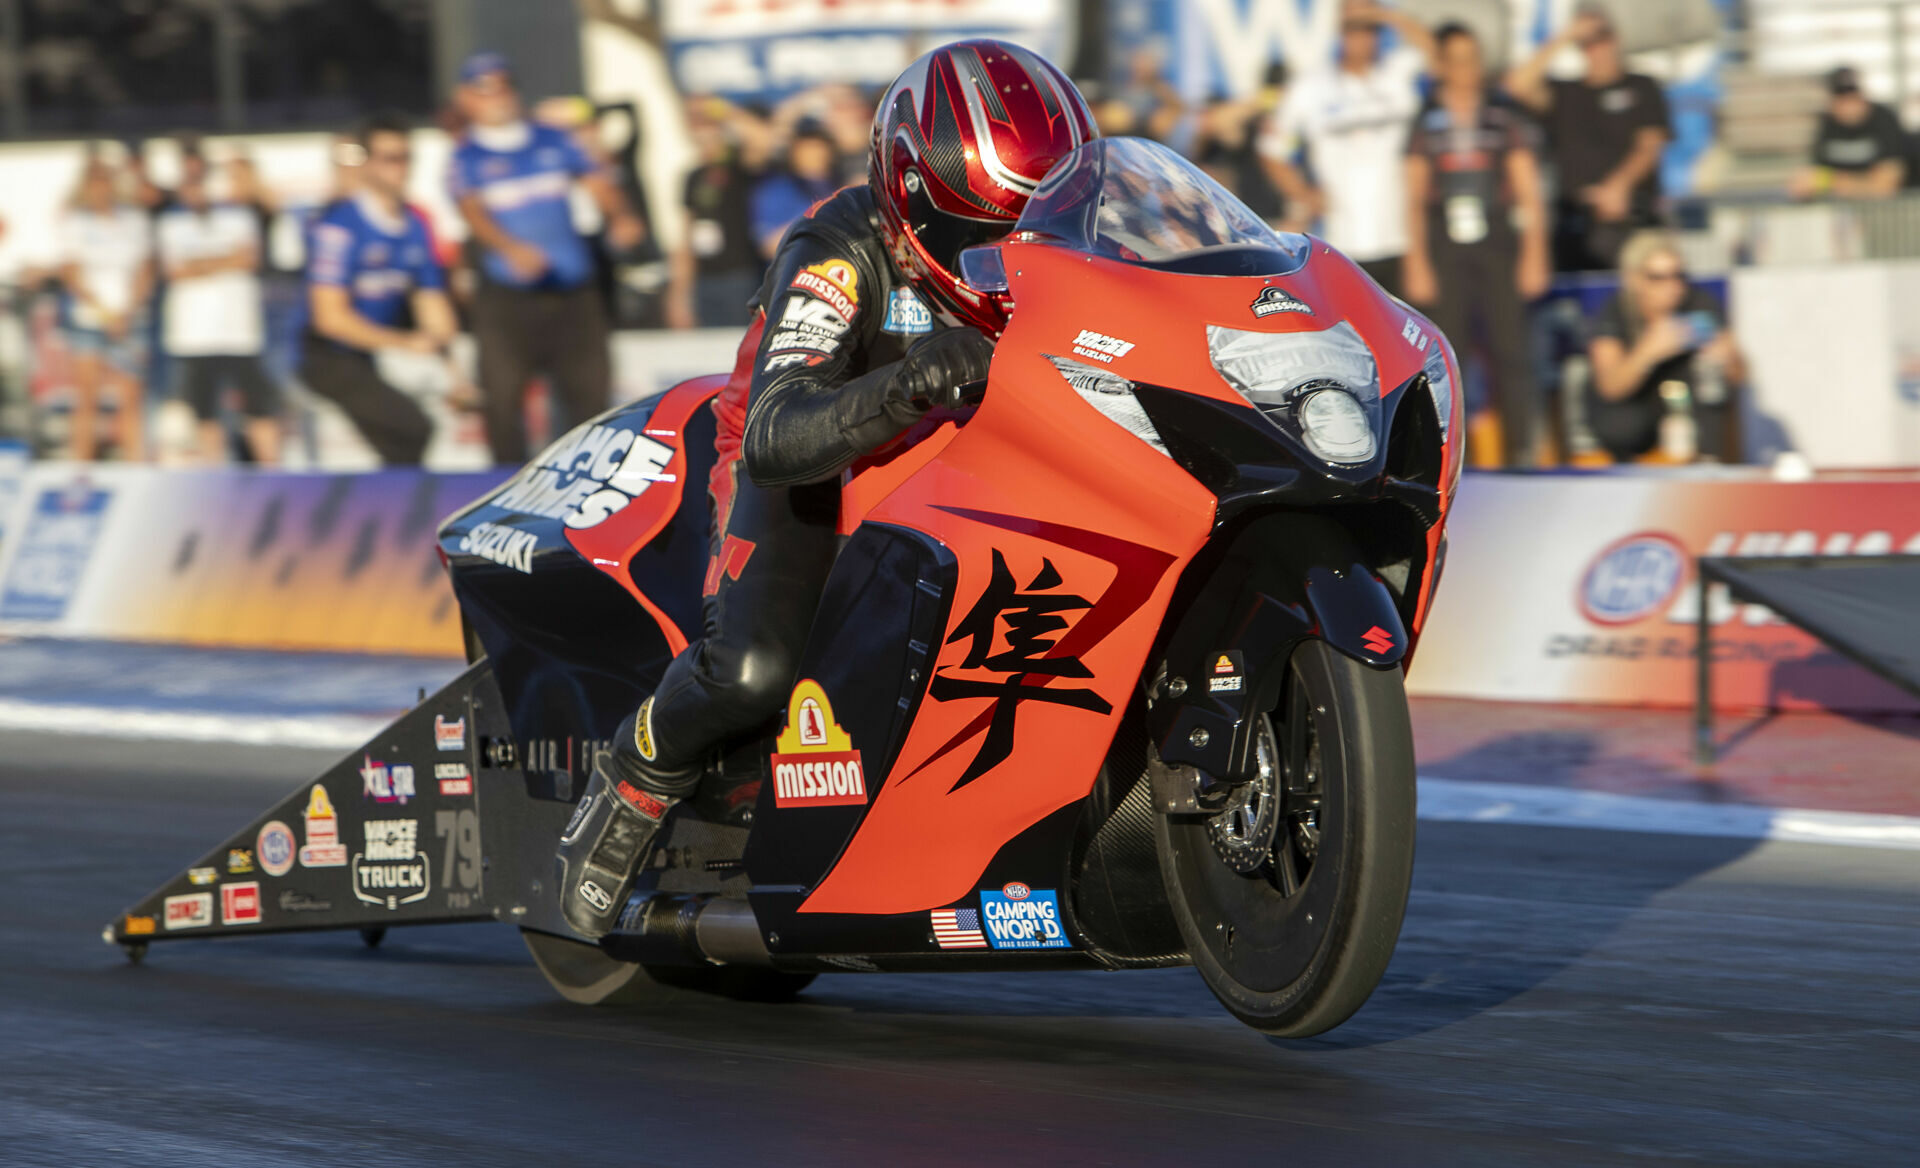 Gaige Herrera (79) capped off his record-breaking rookie season with a win in the NHRA Finals and a Pro Stock Motorcycle Championship. Photo courtesy Suzuki Motor USA, LLC.